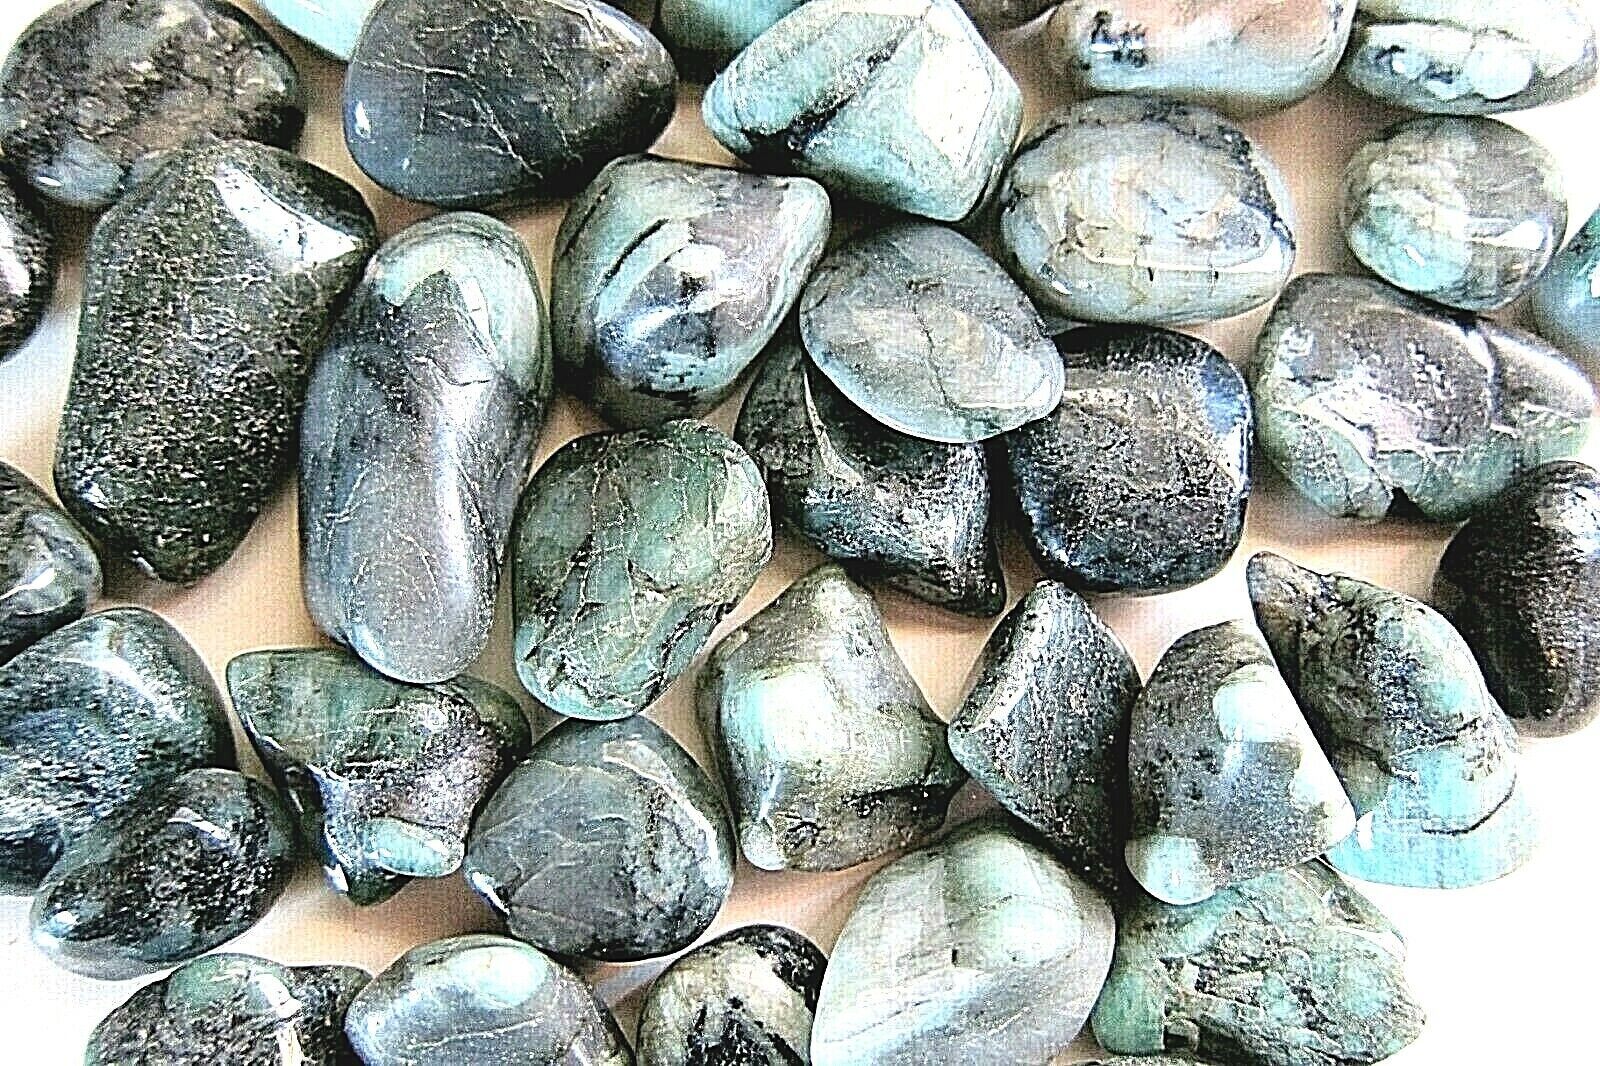 One Emerald Tumbled Stone B Grade 30-40mm Healing Crystals Wealth Money Success